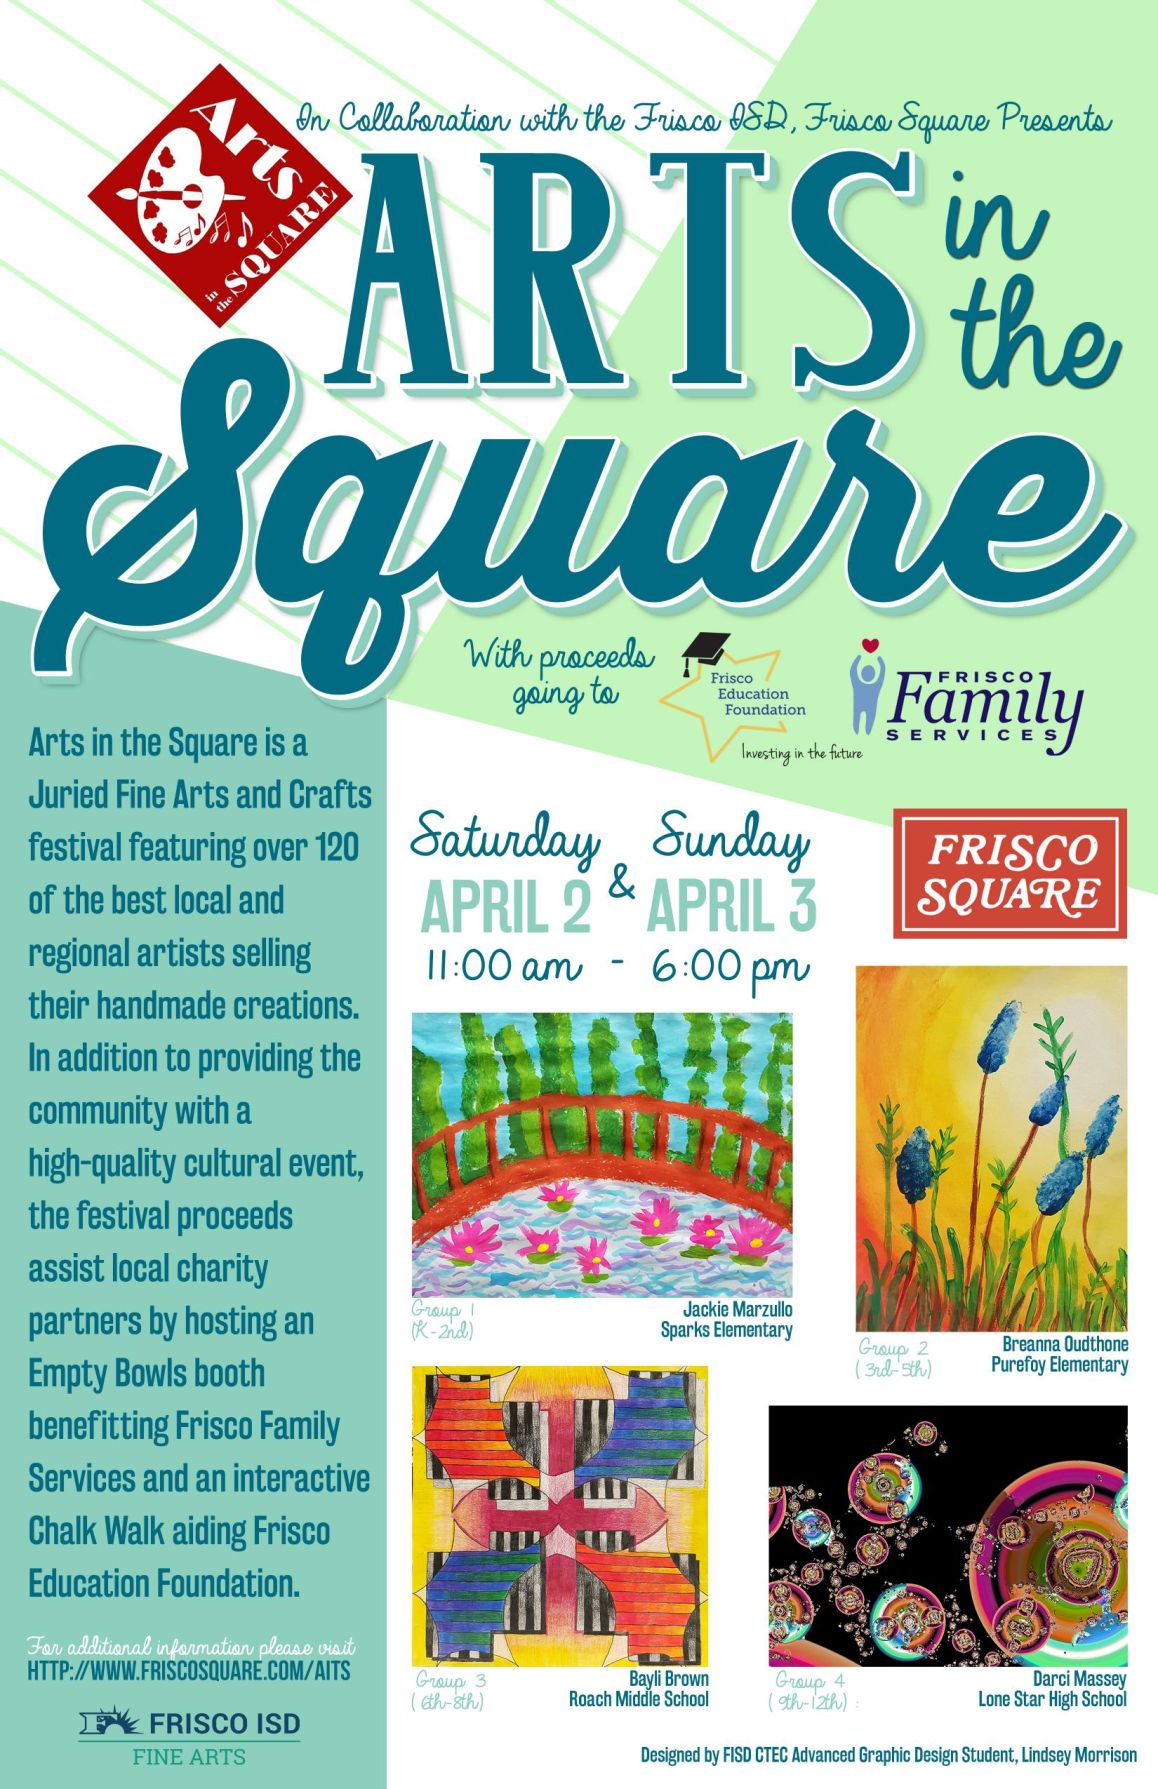 Arts in the Square winning poster design by Lindsey Morrison Frisco